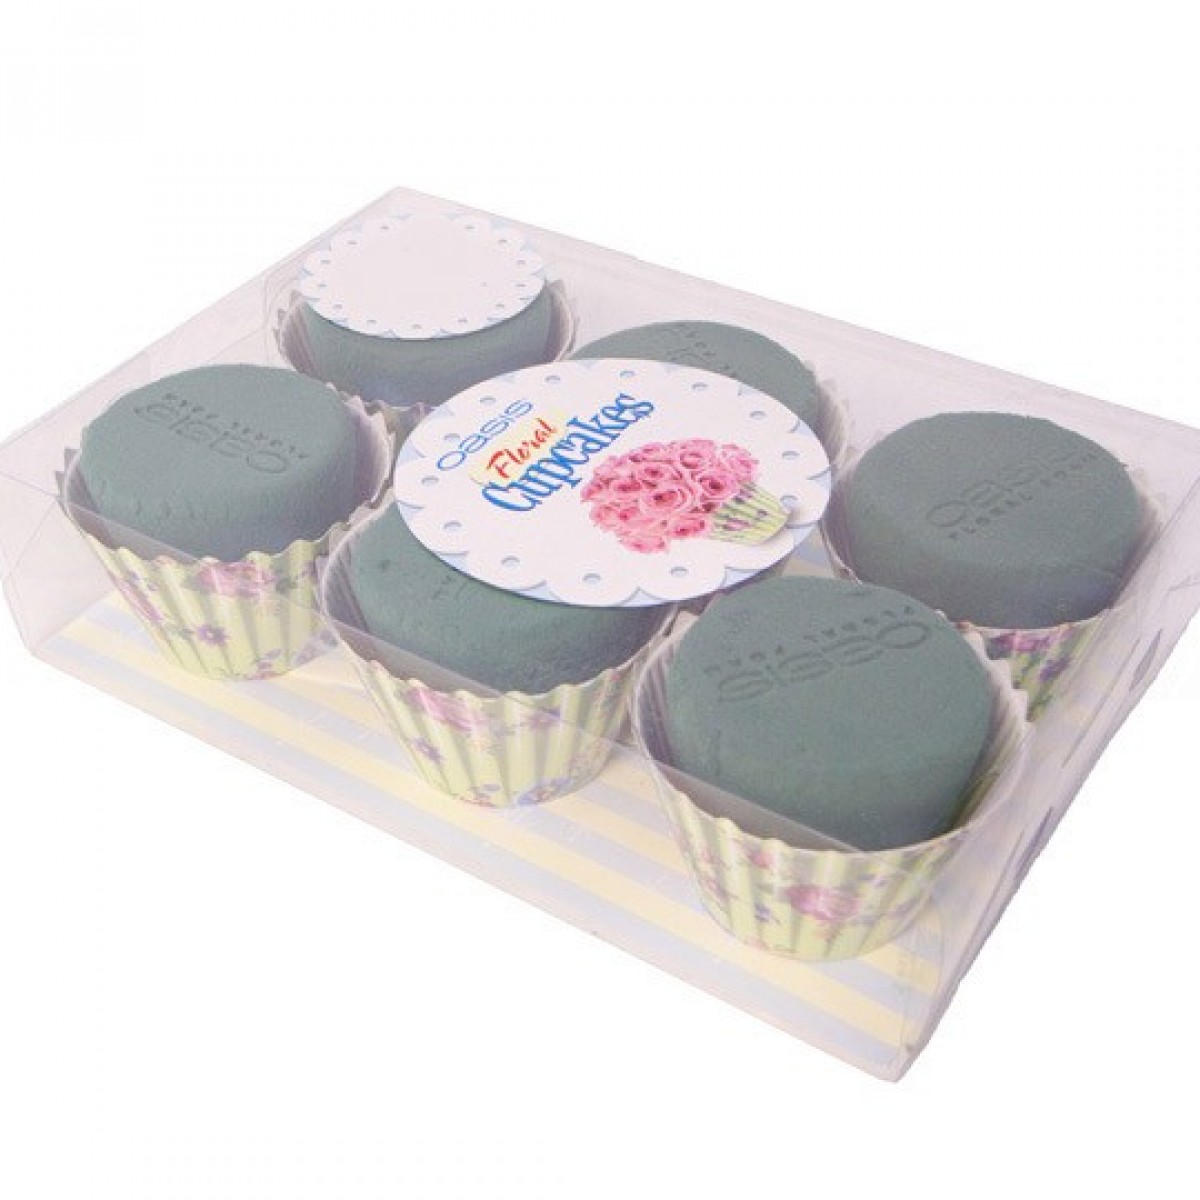 Cupcake 120mm (6 No) Oasis Floral Foam Shape With Skirt